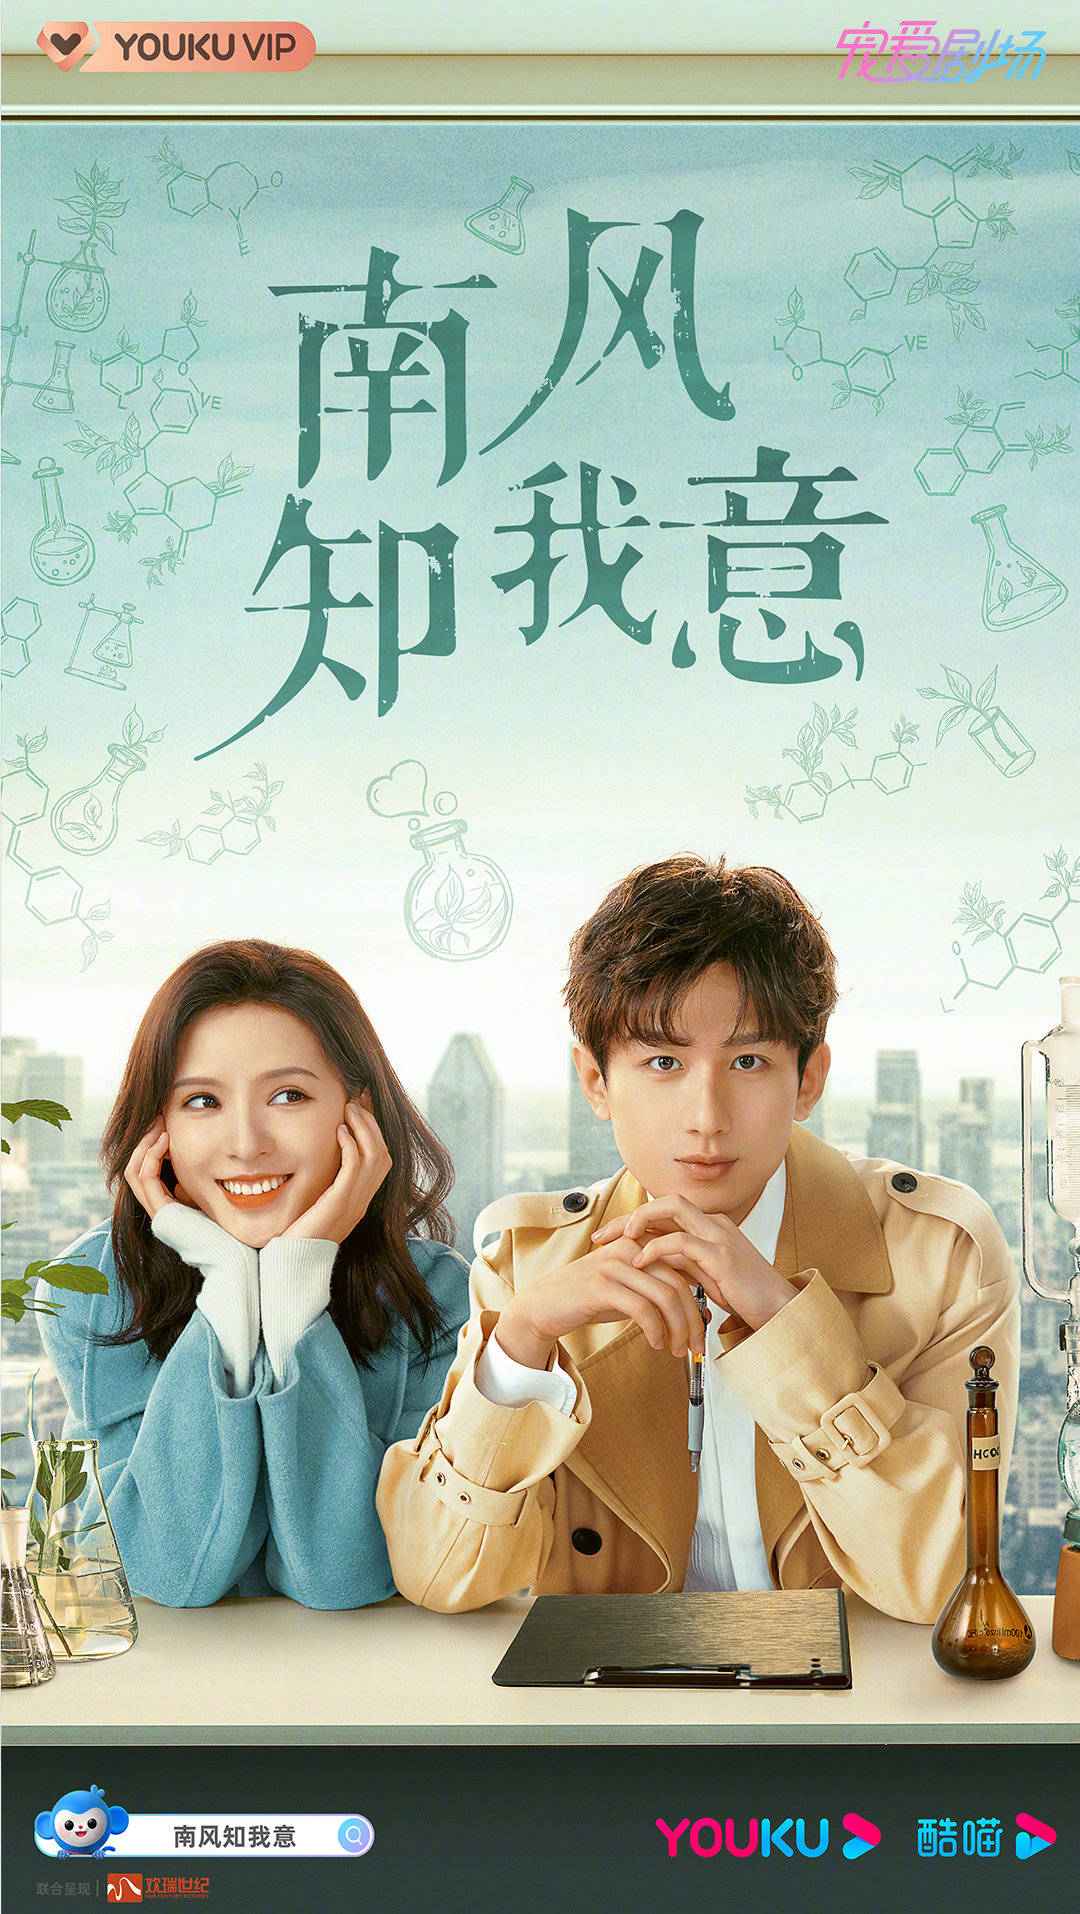 ᴢʜᴀɴɢ ʏᴜxɪ °•张予曦•° ᴜᴘᴅᴀᴛᴇs 🍉 on Twitter: &quot;New poster of the modern romance  drama《南风知我意| South Wind Knows My mood》released today at Youku&#39;s annual  press con. event. - 🔗https://t.co/8rsZSFkKa2 #